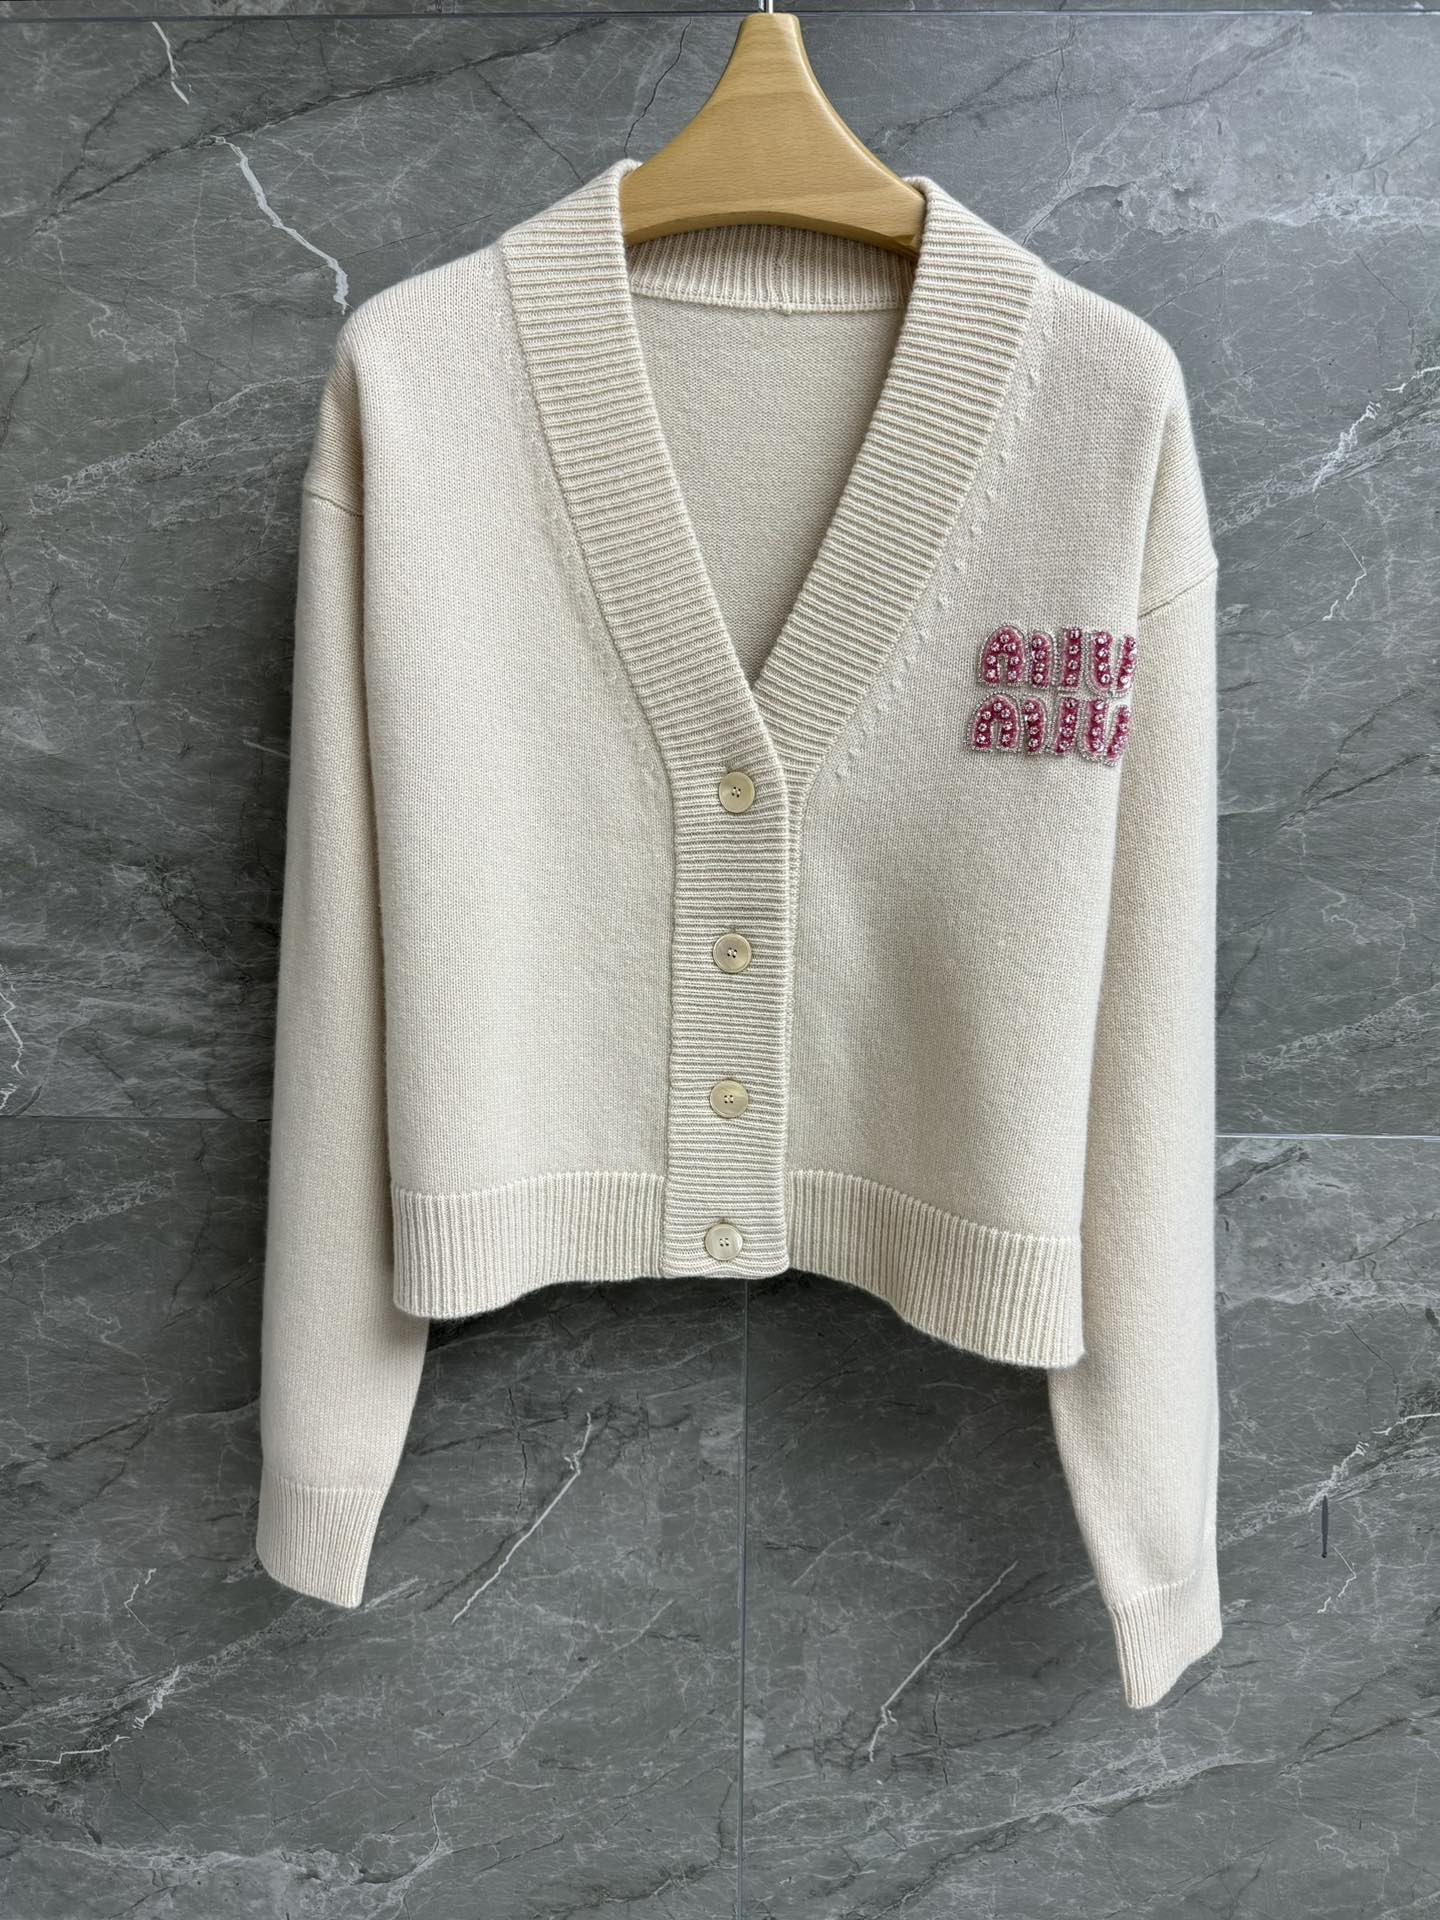 MiuMiu Clothing Cardigans Set With Diamonds Cashmere Spring Collection SML535360